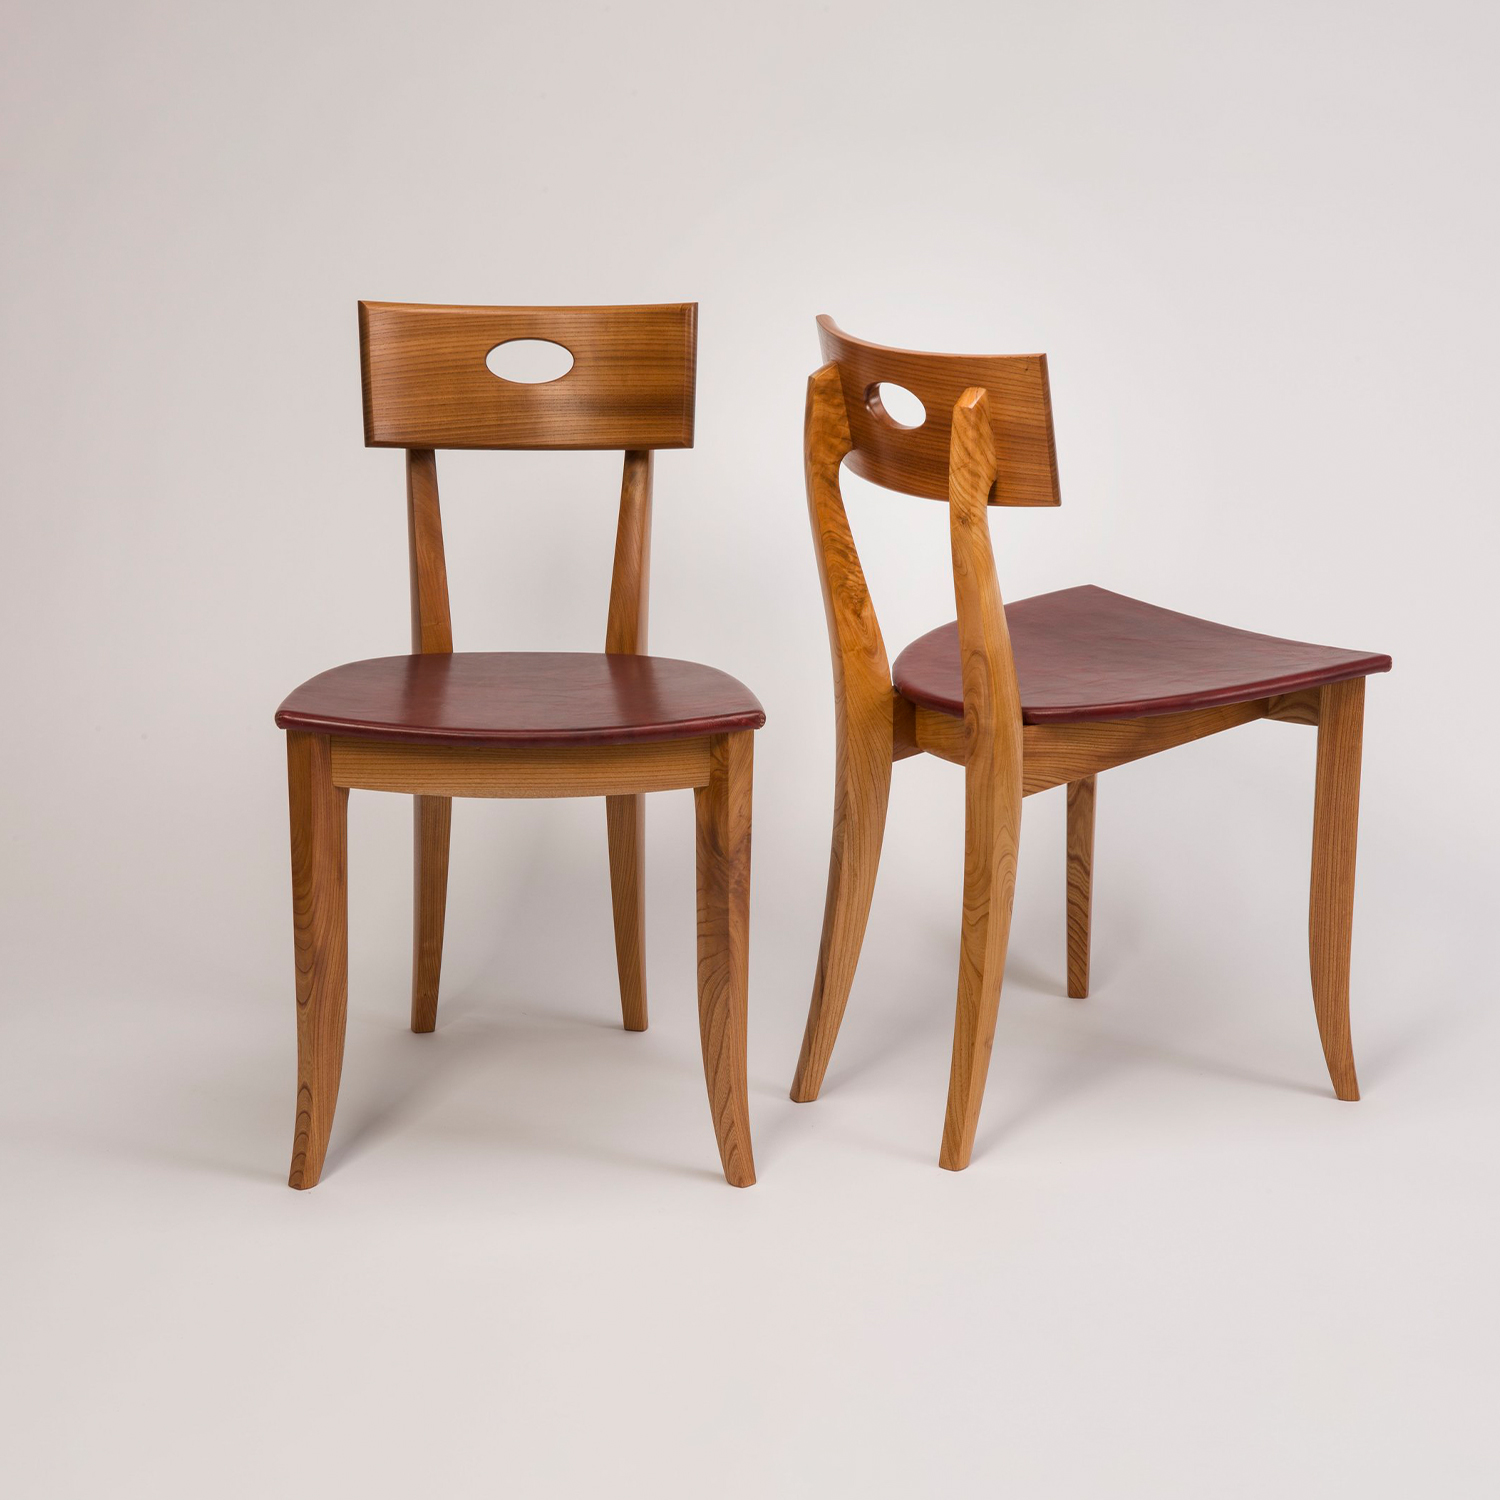 Michael Hurwitz - Red Leather Dining Chair